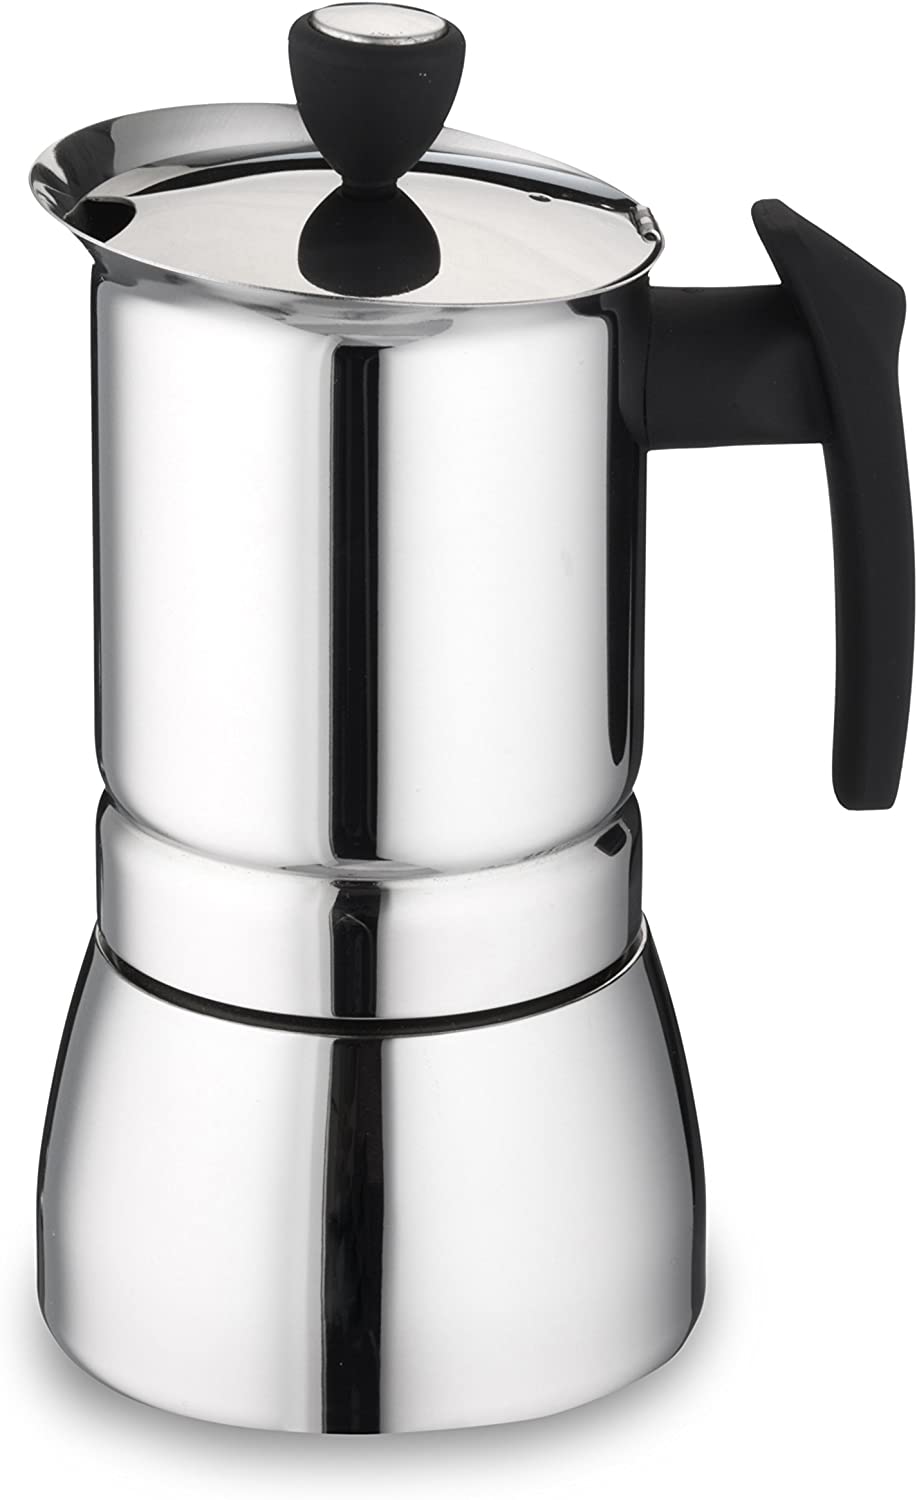 Grunwerg Cafe Ole Italian Style Induction Expresso Coffee Maker- 6 cups